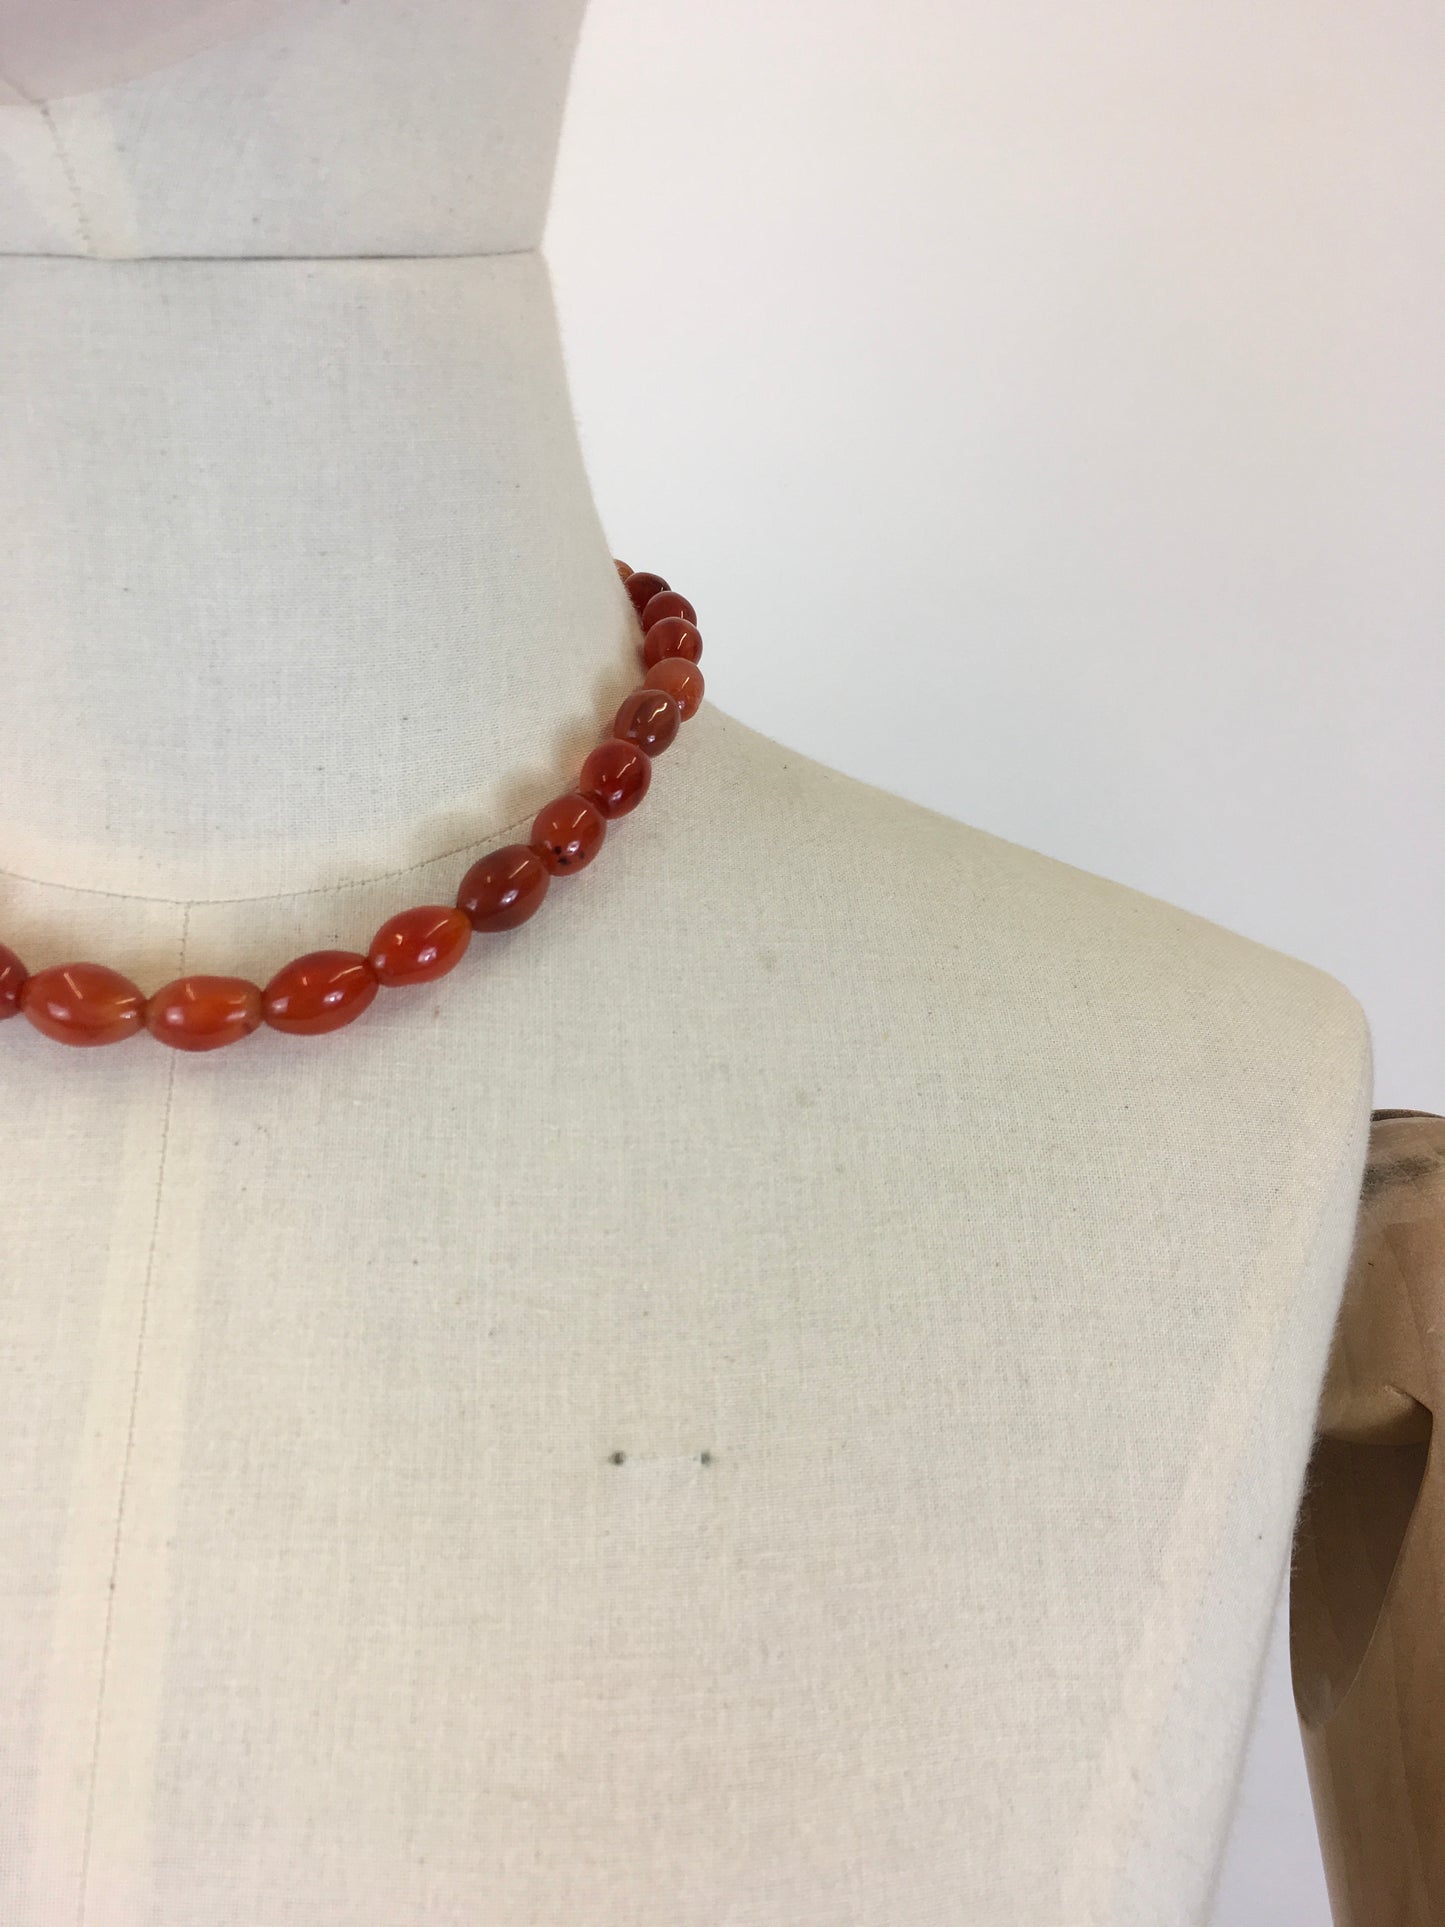 Original 1940's Darling Amber Graduated Beaded Necklace - With Screw Fastening to the Nape